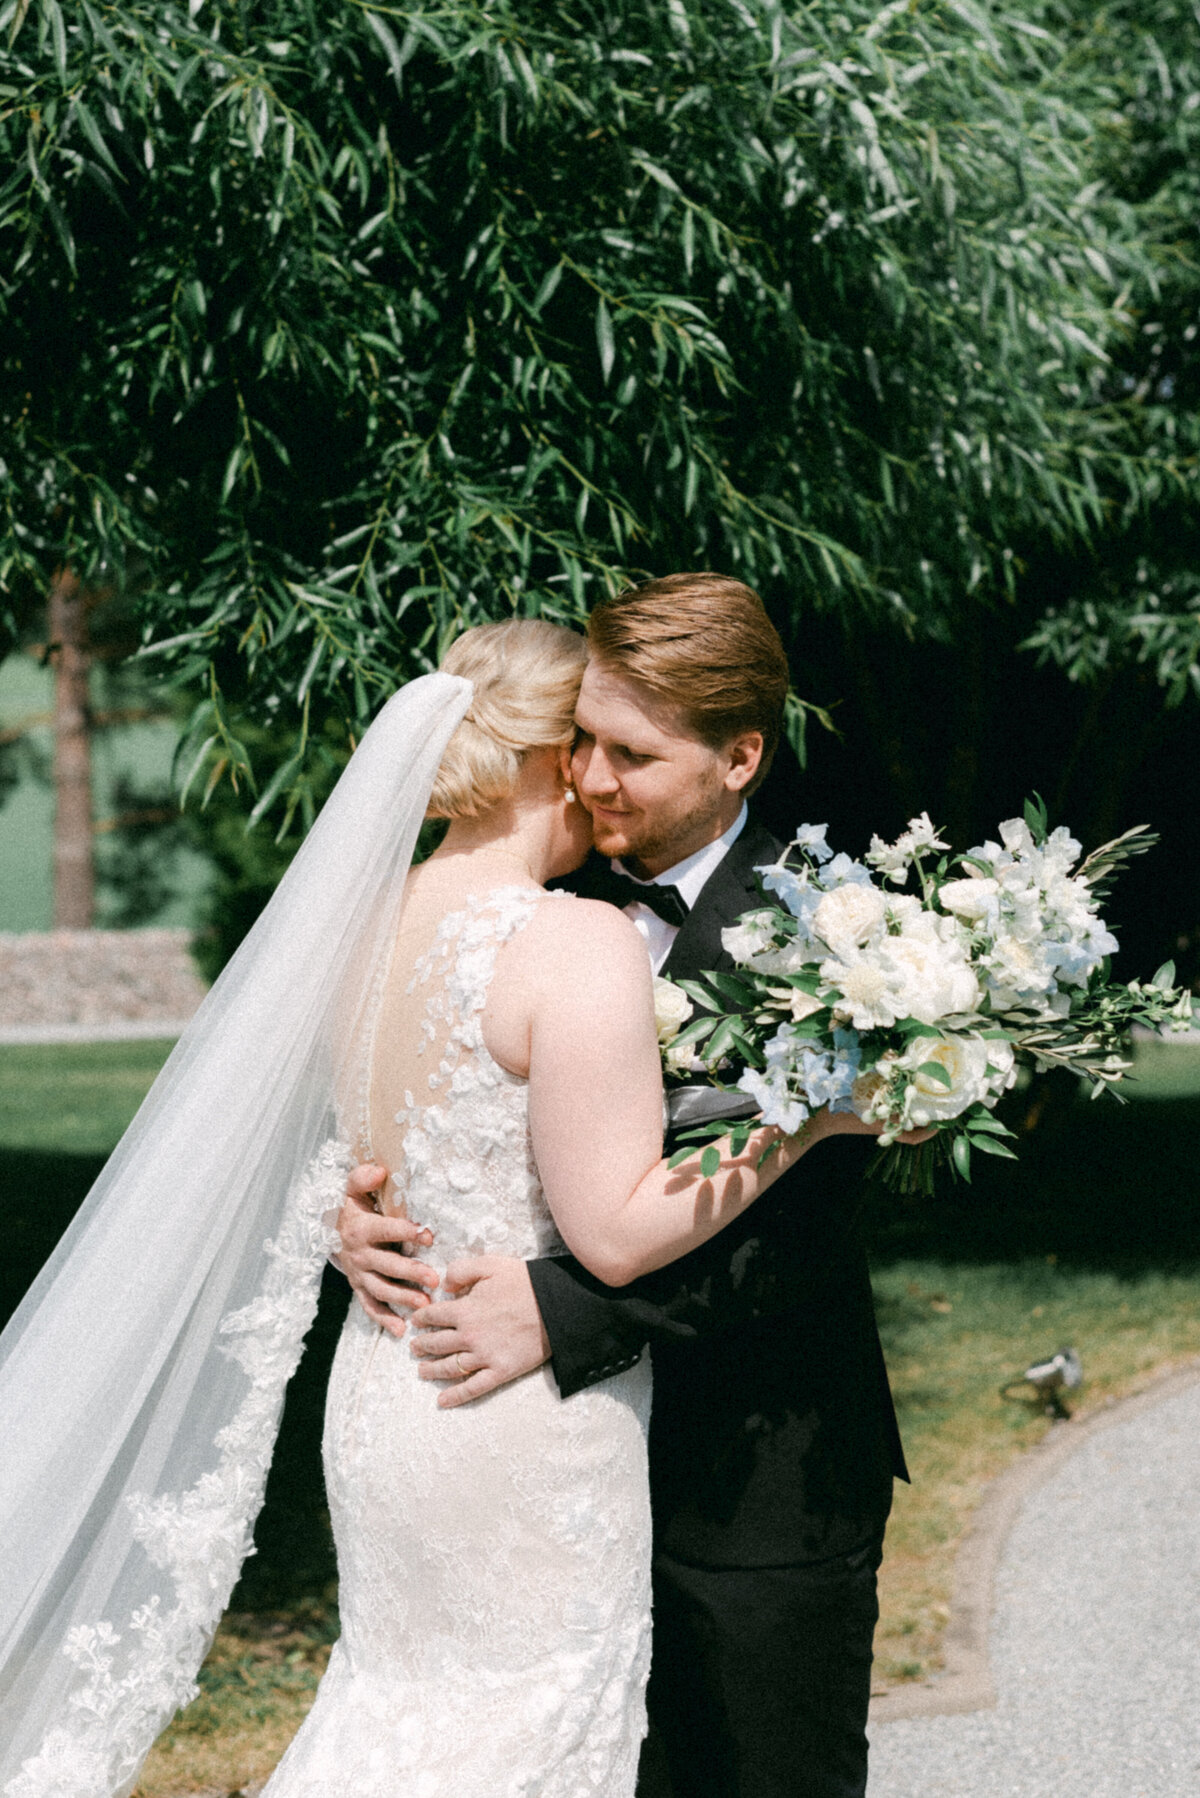 The wedding couple hugging each other photographed by wedding photographer Hannika Gabrielsson.